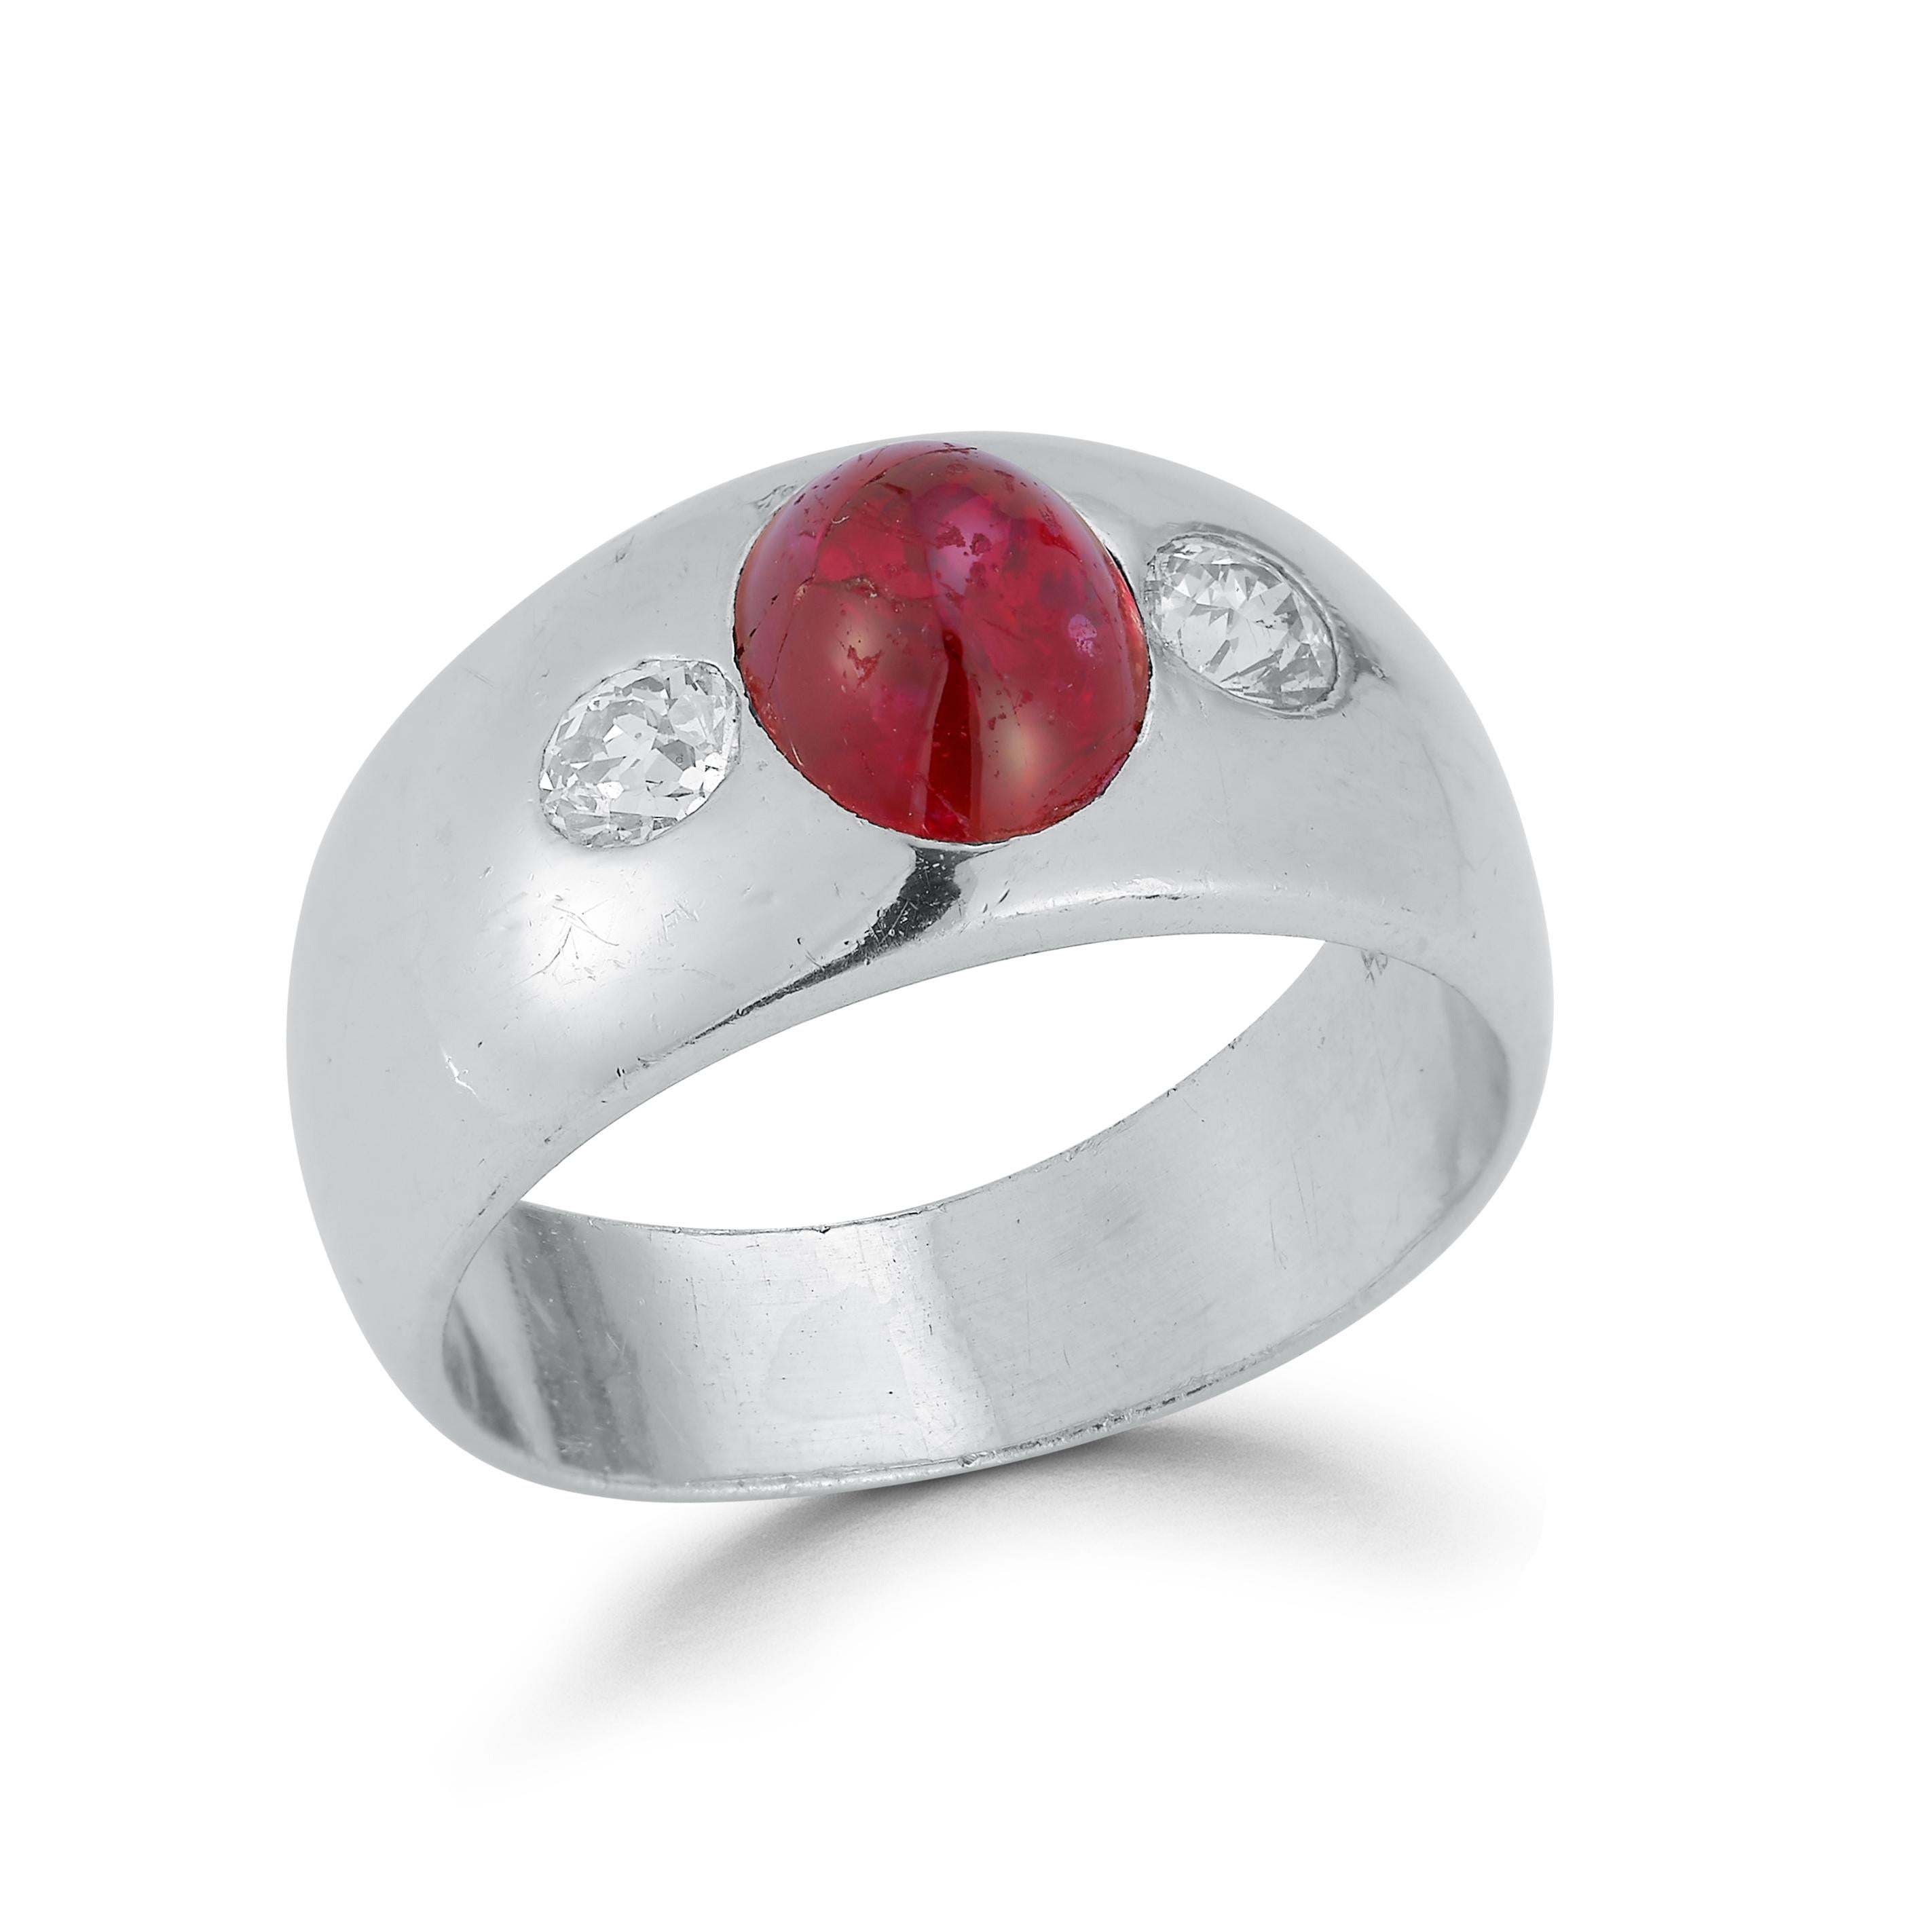 Cabochon Ruby & Diamond Mens  Ring 

1 cabochon center ruby along side 2 round cut diamonds set in platinum.

Diamonds total approximate weight: 0.45ct

Ring Size: 7.5

Re sizable free of charge 